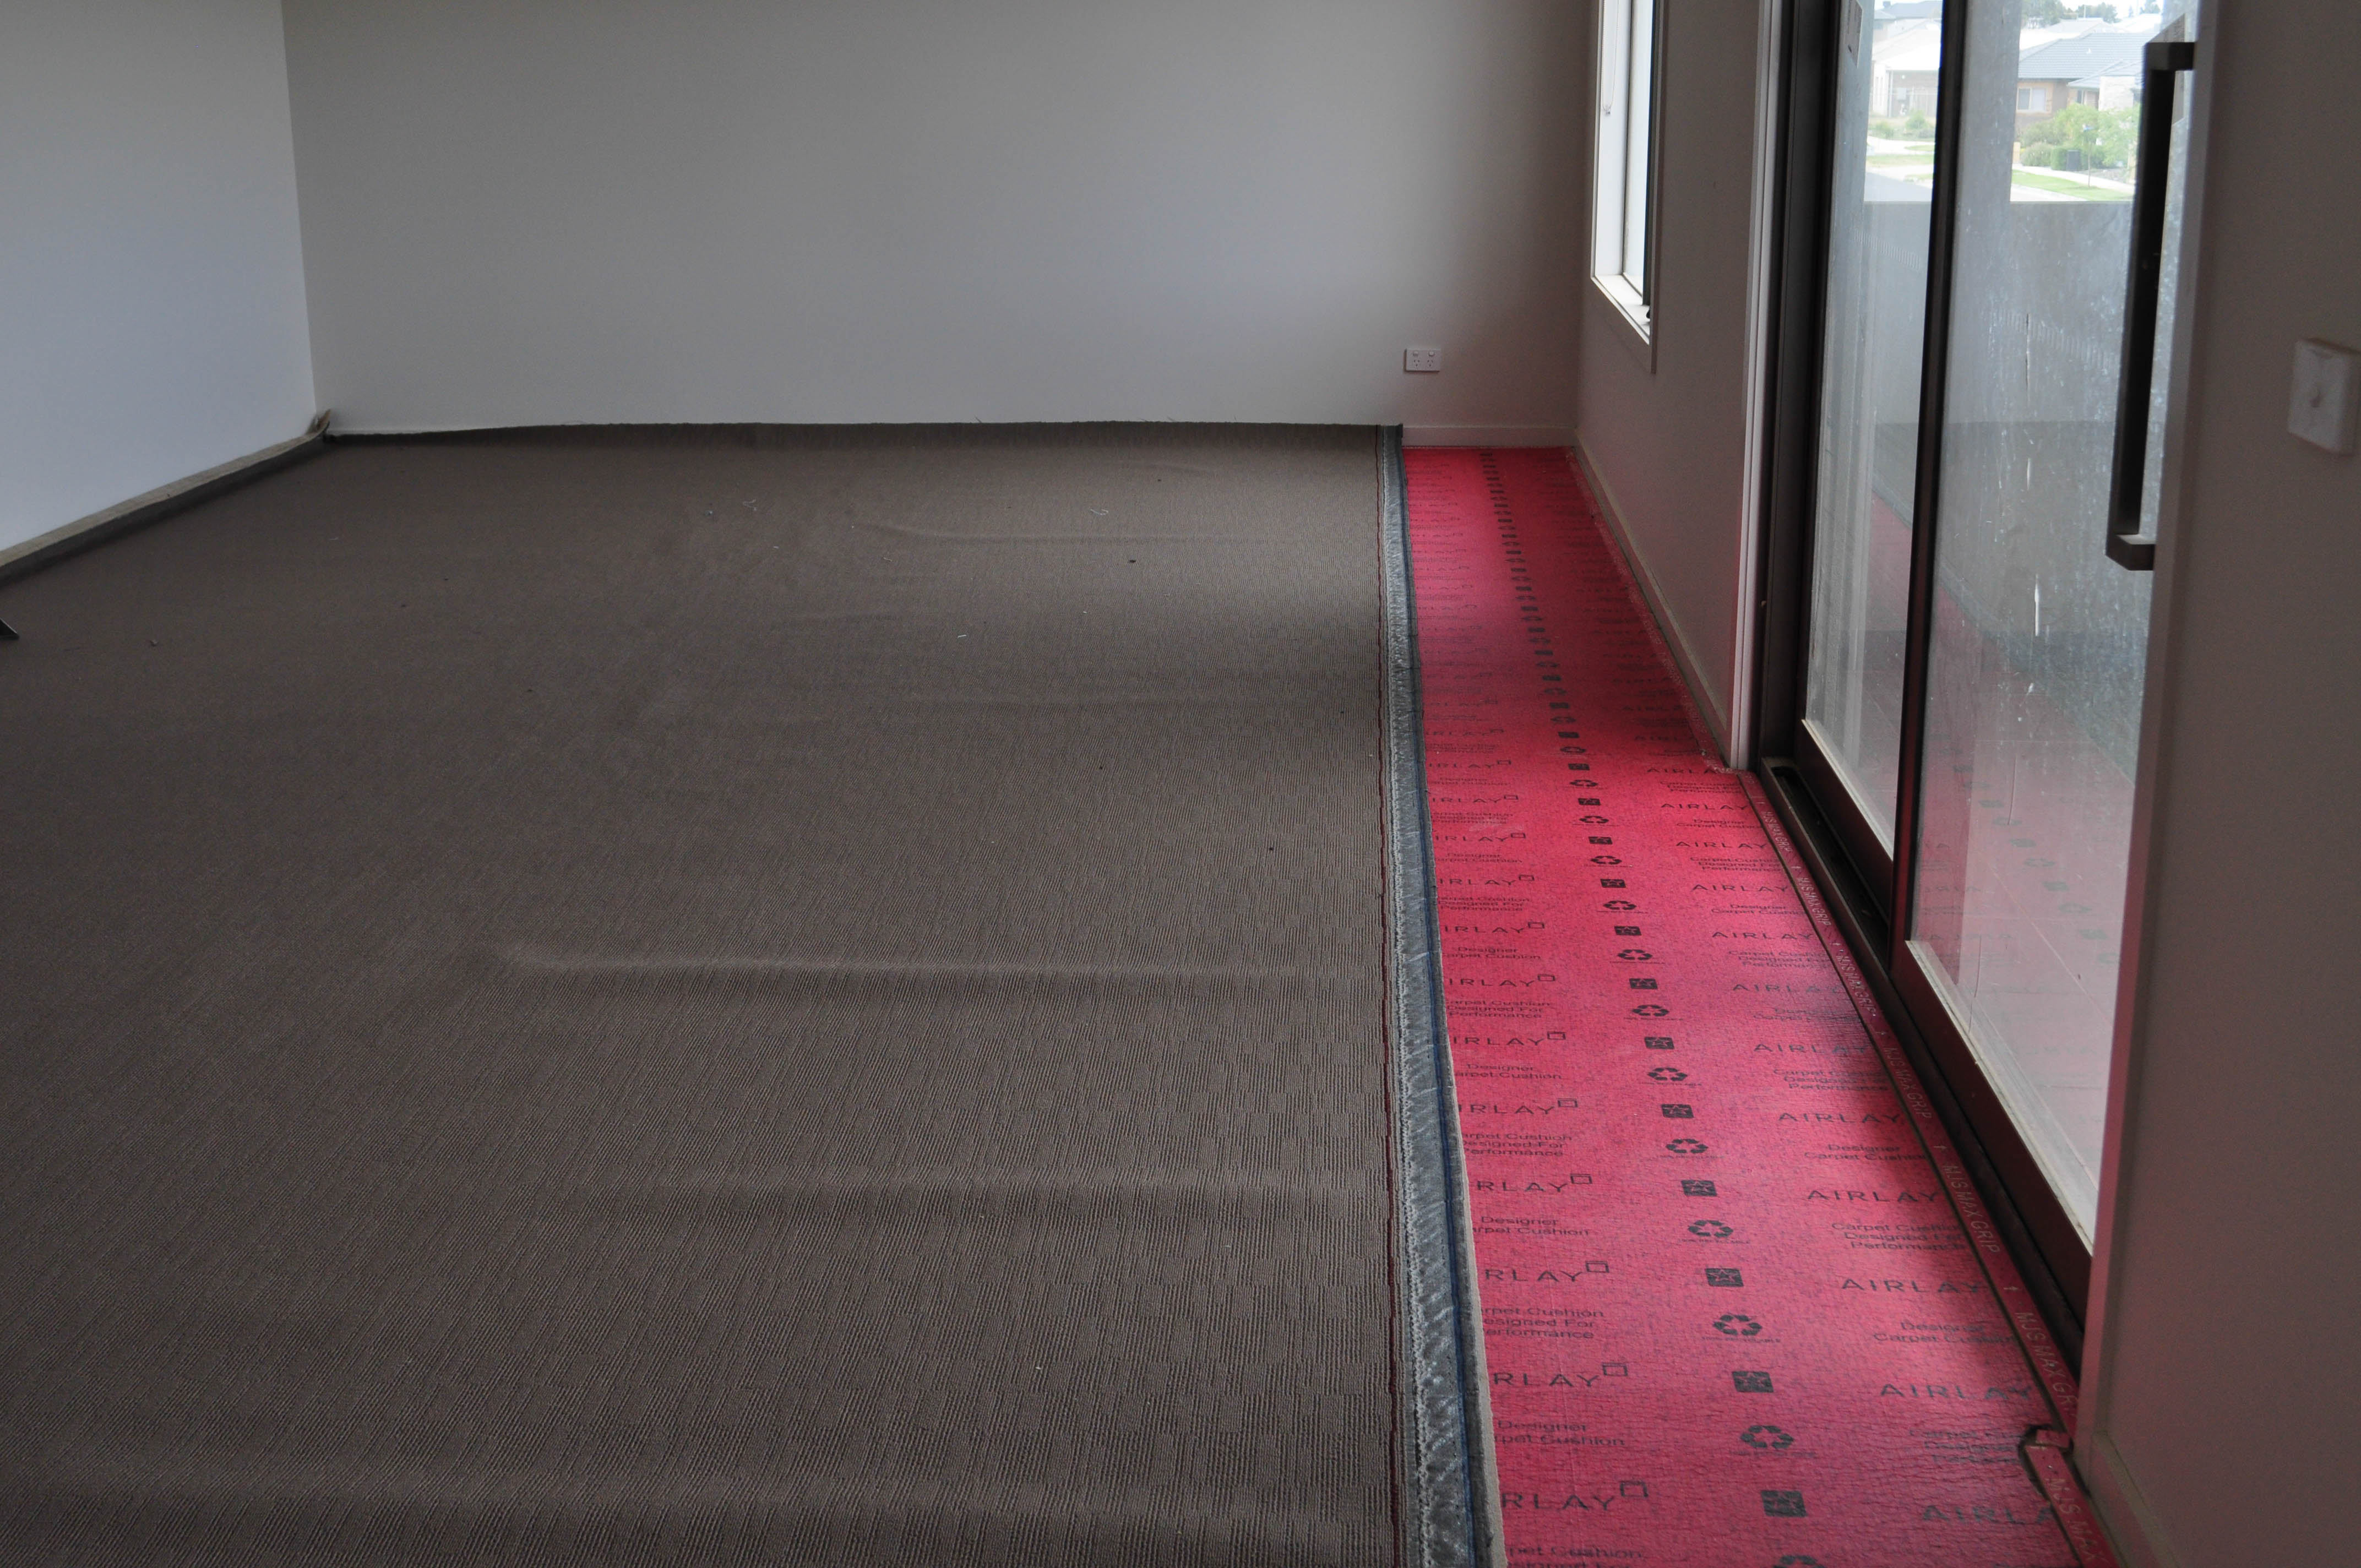 shows a large room that is having carpet laid. The carpet is rolled out and covers most ofthe floor. To effectively stretch this carpet 
 the carpet layer needs to use a power stretcher. The laying of the carpet was done by Concord Floors.